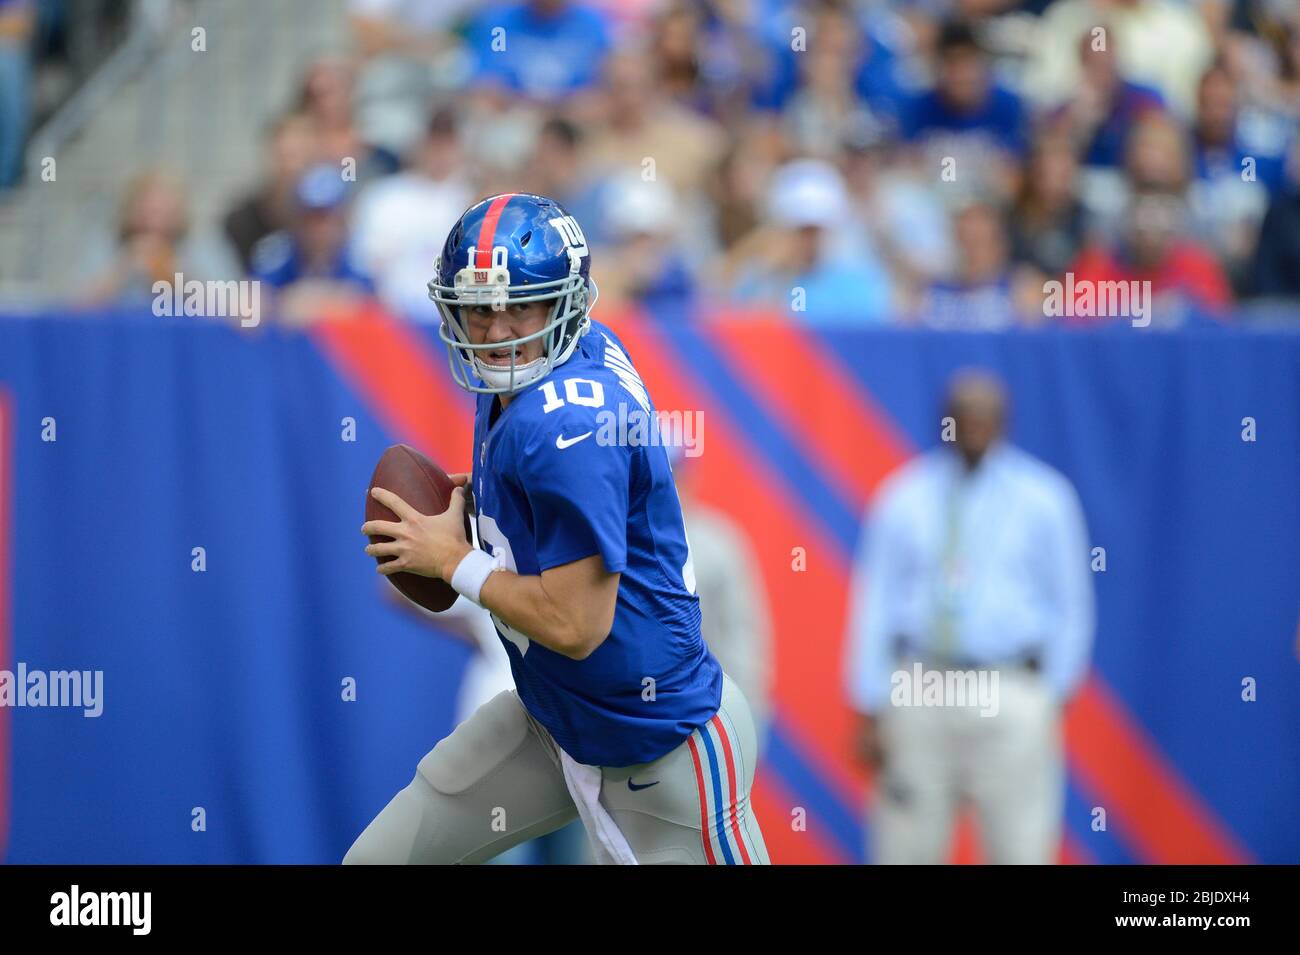 16 September 2012: New York Giants quarterback Eli Manning (10) rolls out of the pocket looking to pass during a week 2 NFL NFC matchup between the Ta Stock Photo